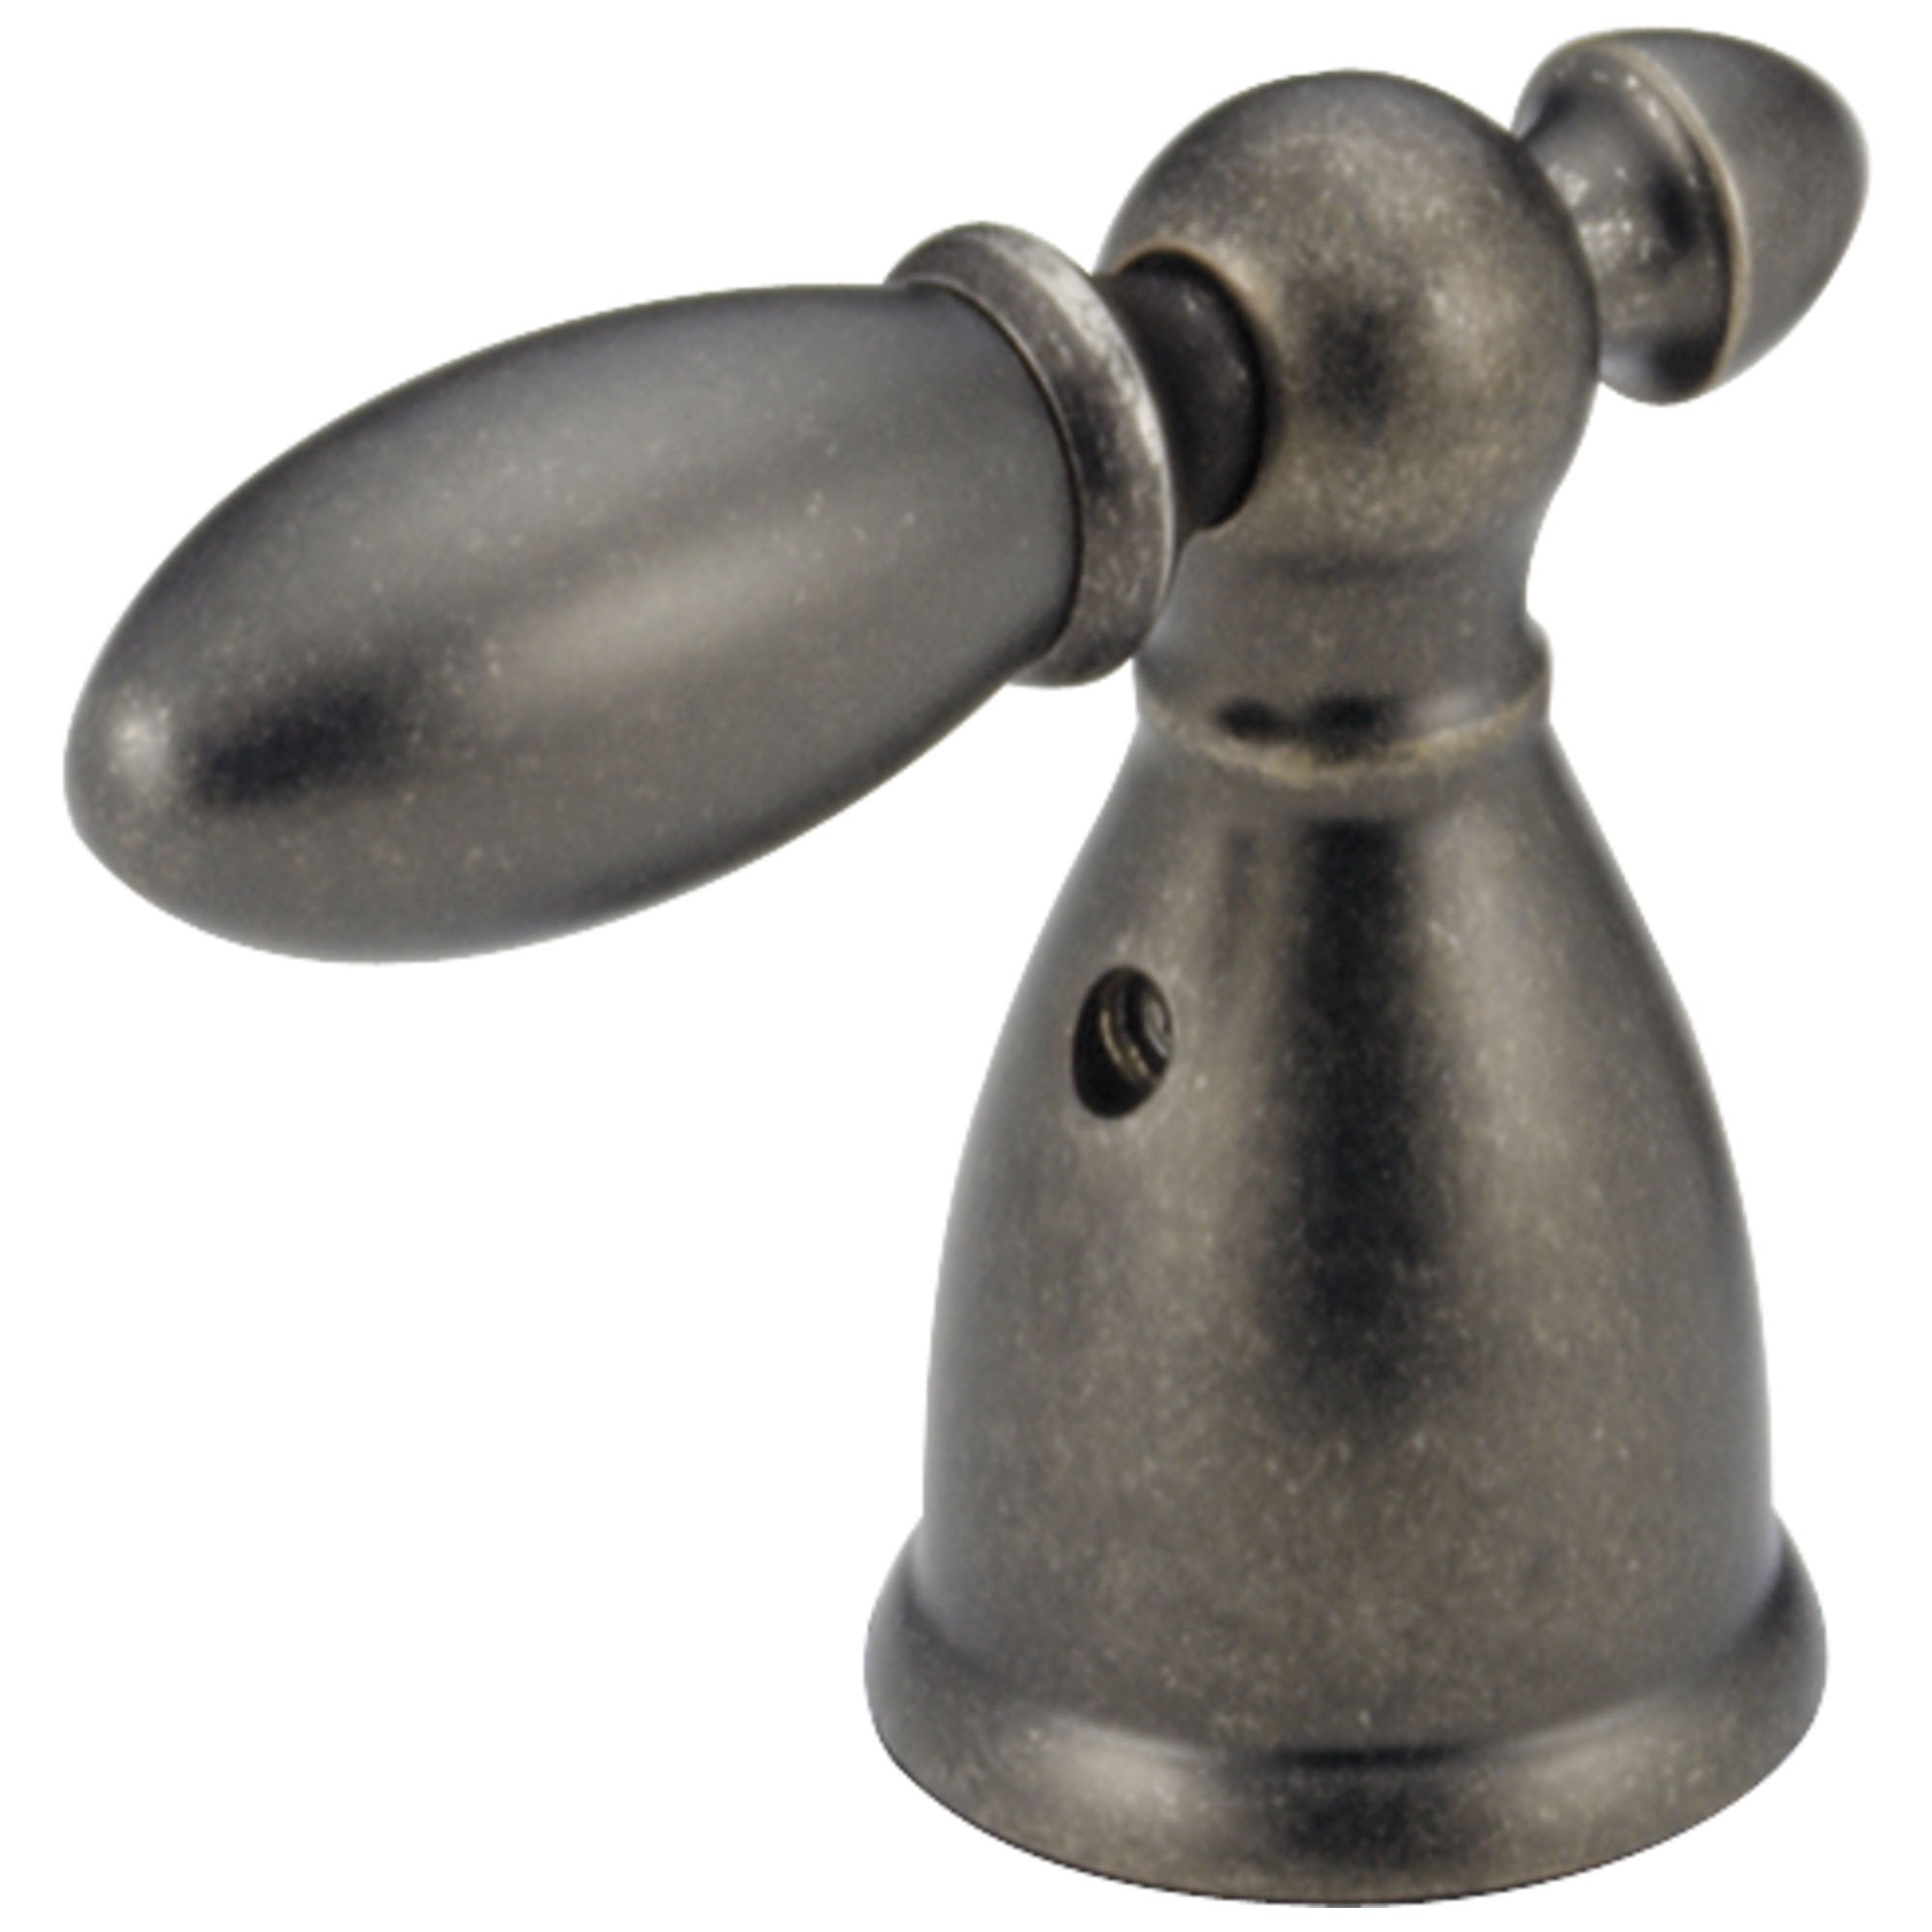 Delta Victorian Collection Aged Pewter Finish Lavatory / Kitchen Metal Lever Handles - Quantity 2 Included 94205